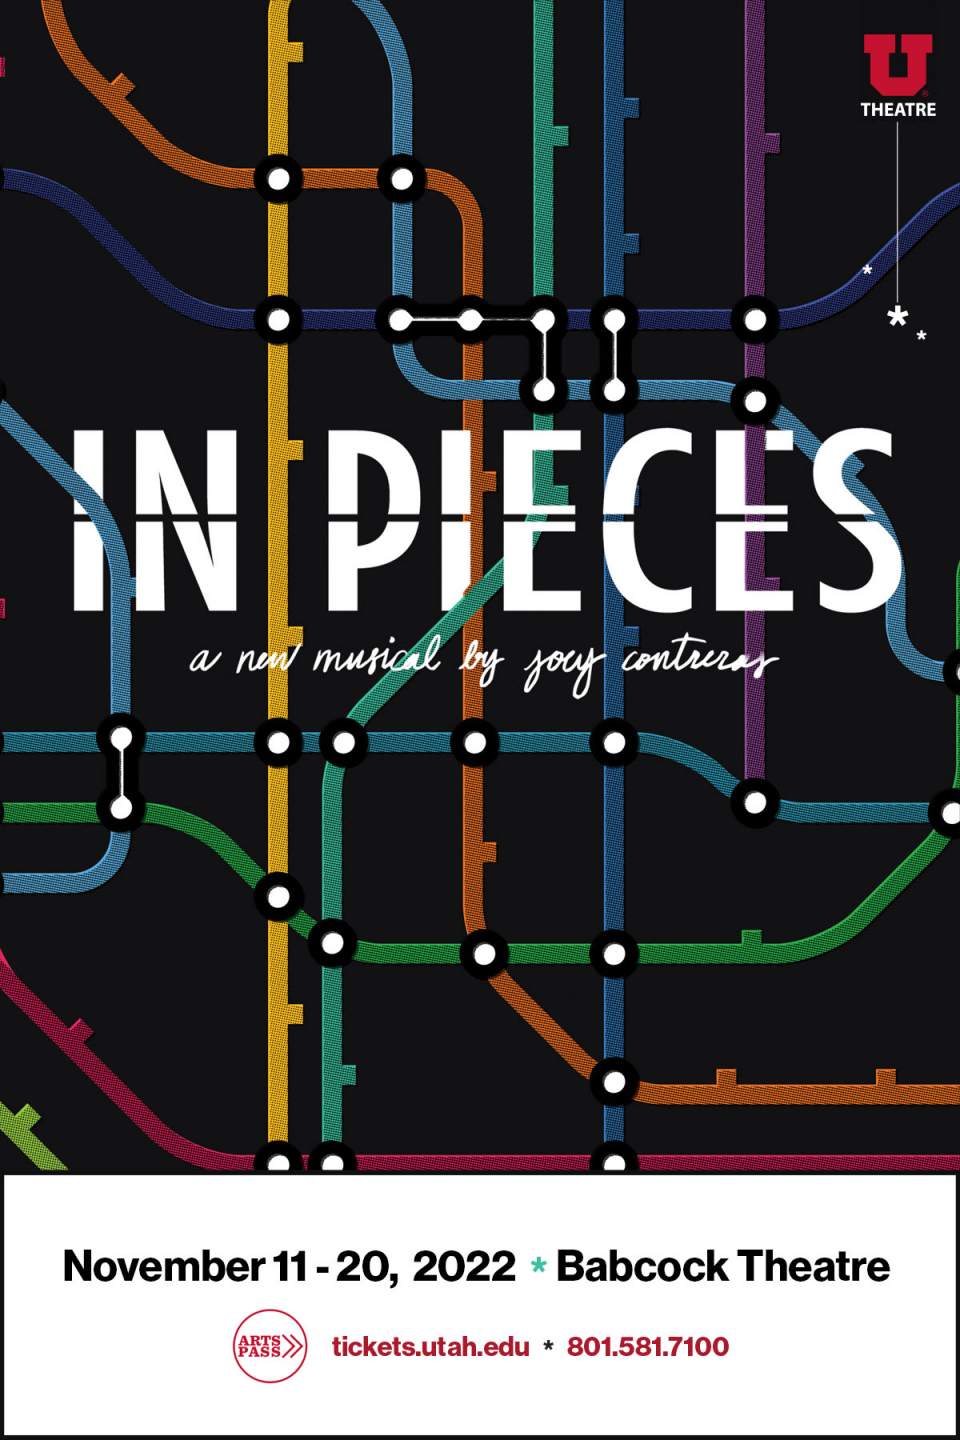 In Pieces: a New Musical